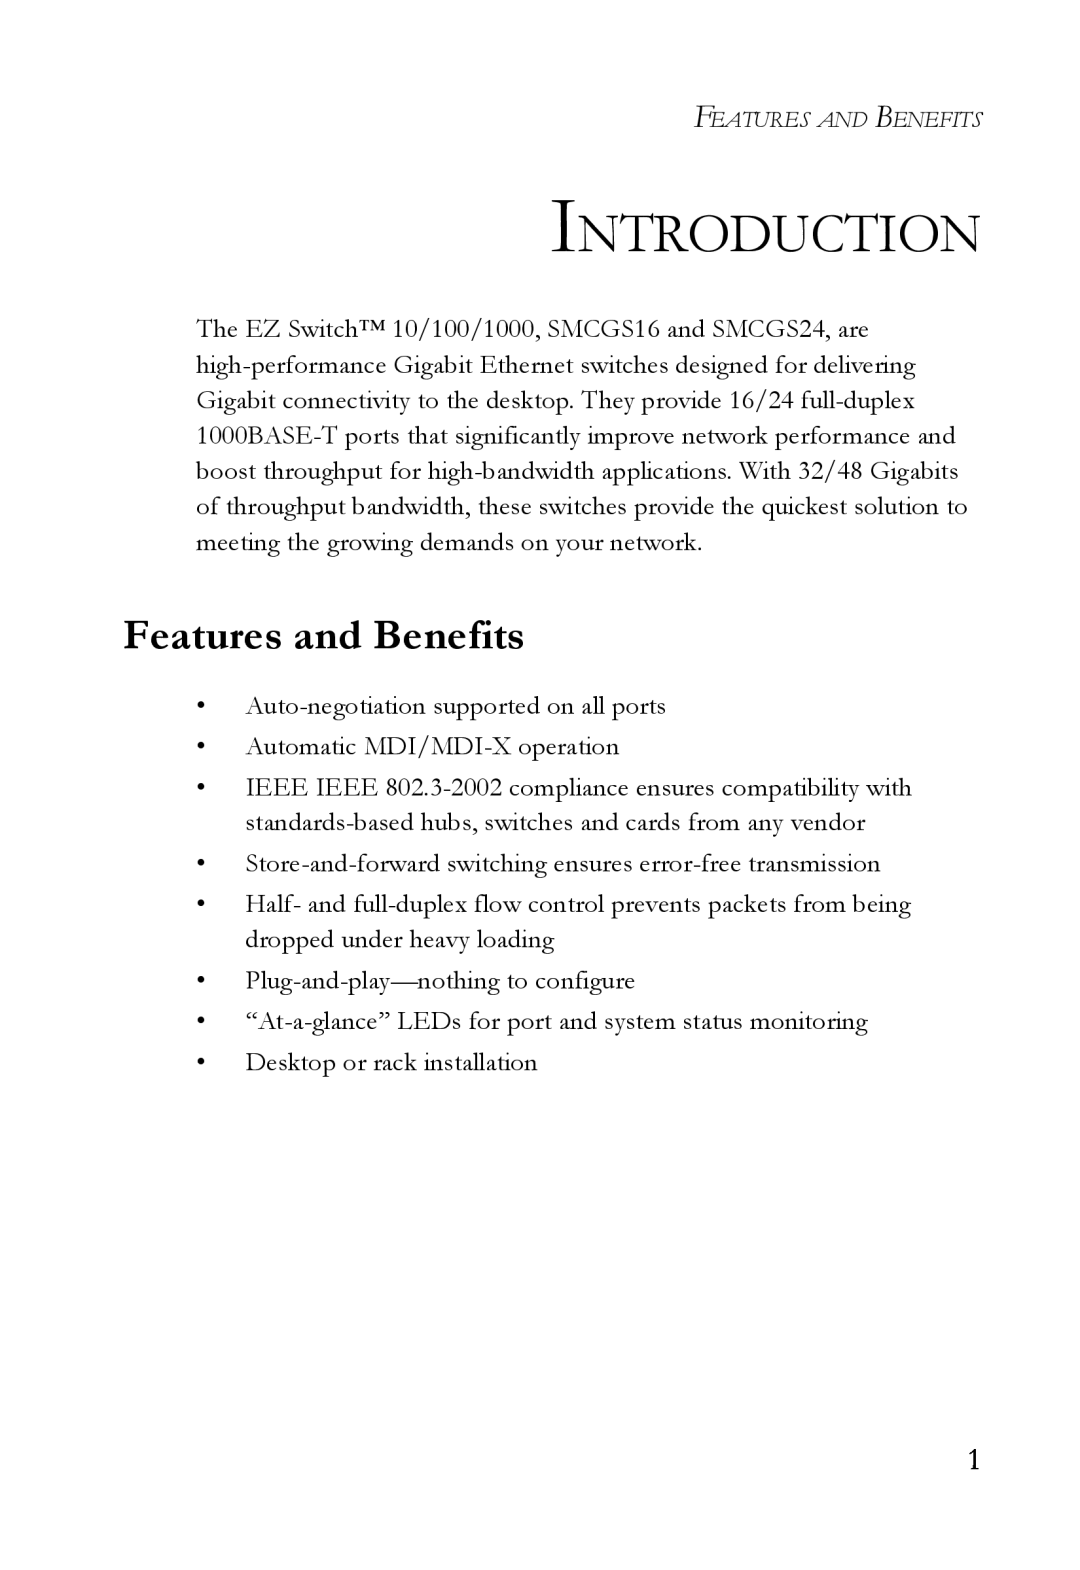 SMC Networks SMCGS24 manual Introduction, Features and Benefits 